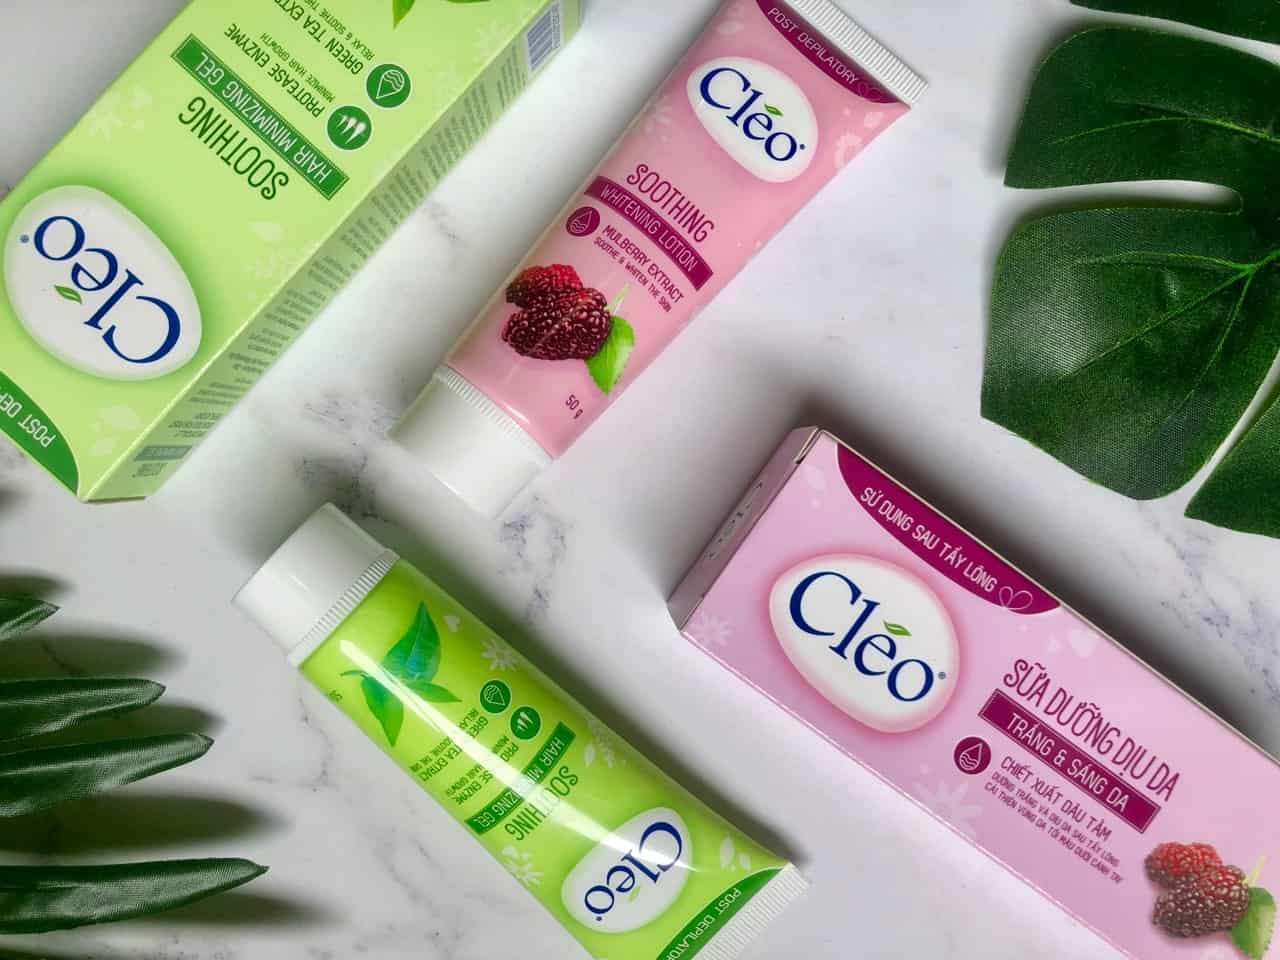 Cleo 2in1 Soothing Whitening Lotion